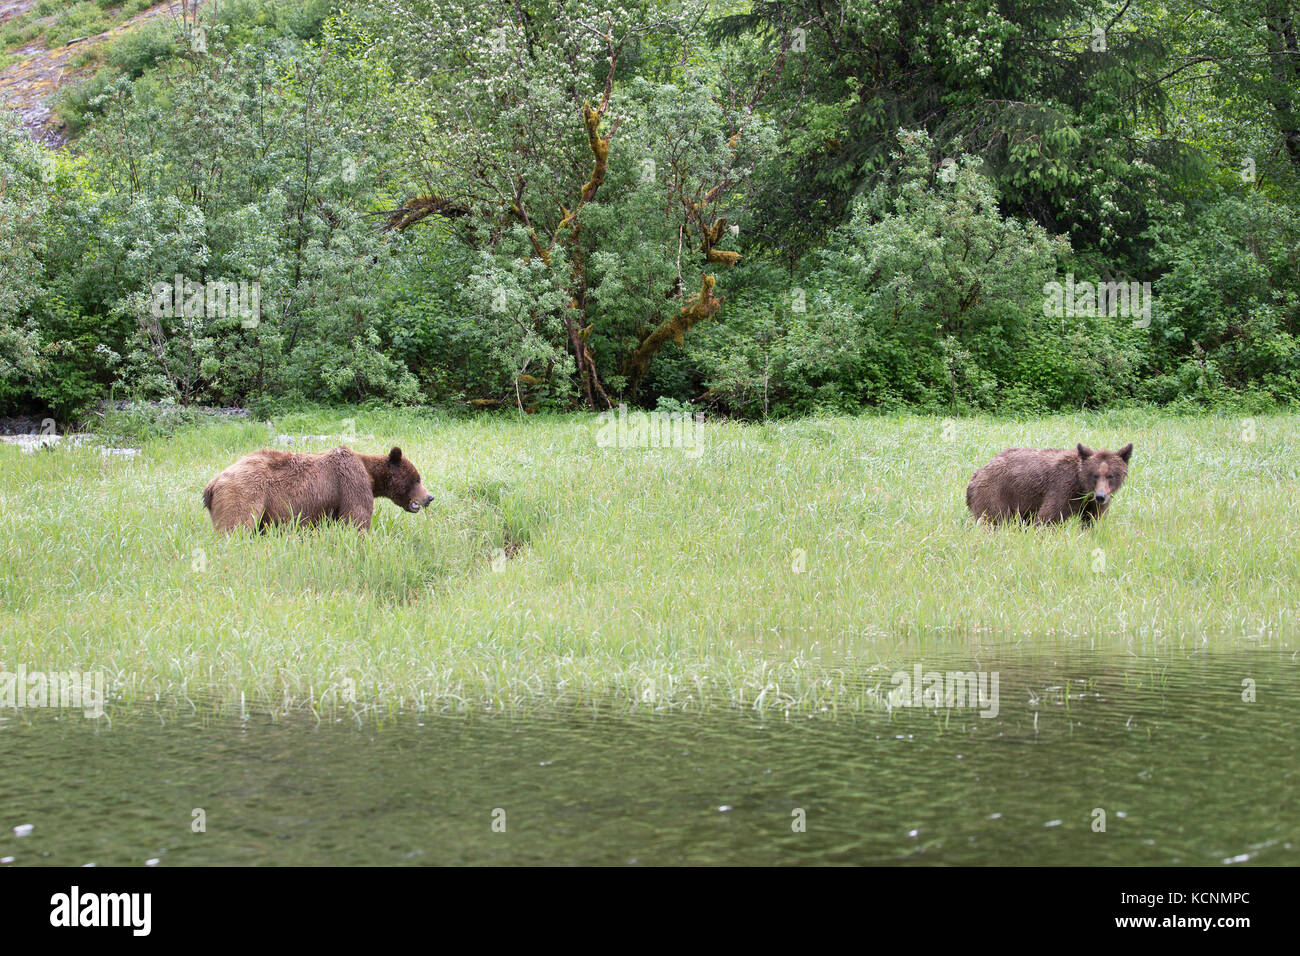 Grizzly bear (Ursus arctos horriblis), courting pair (female at right) eating Lyngbye's sedge (Carex lyngbyei), Khutzeymateen Grizzly Bear Sanctuary, British Columbia, Canada. Both are young bears. Stock Photo